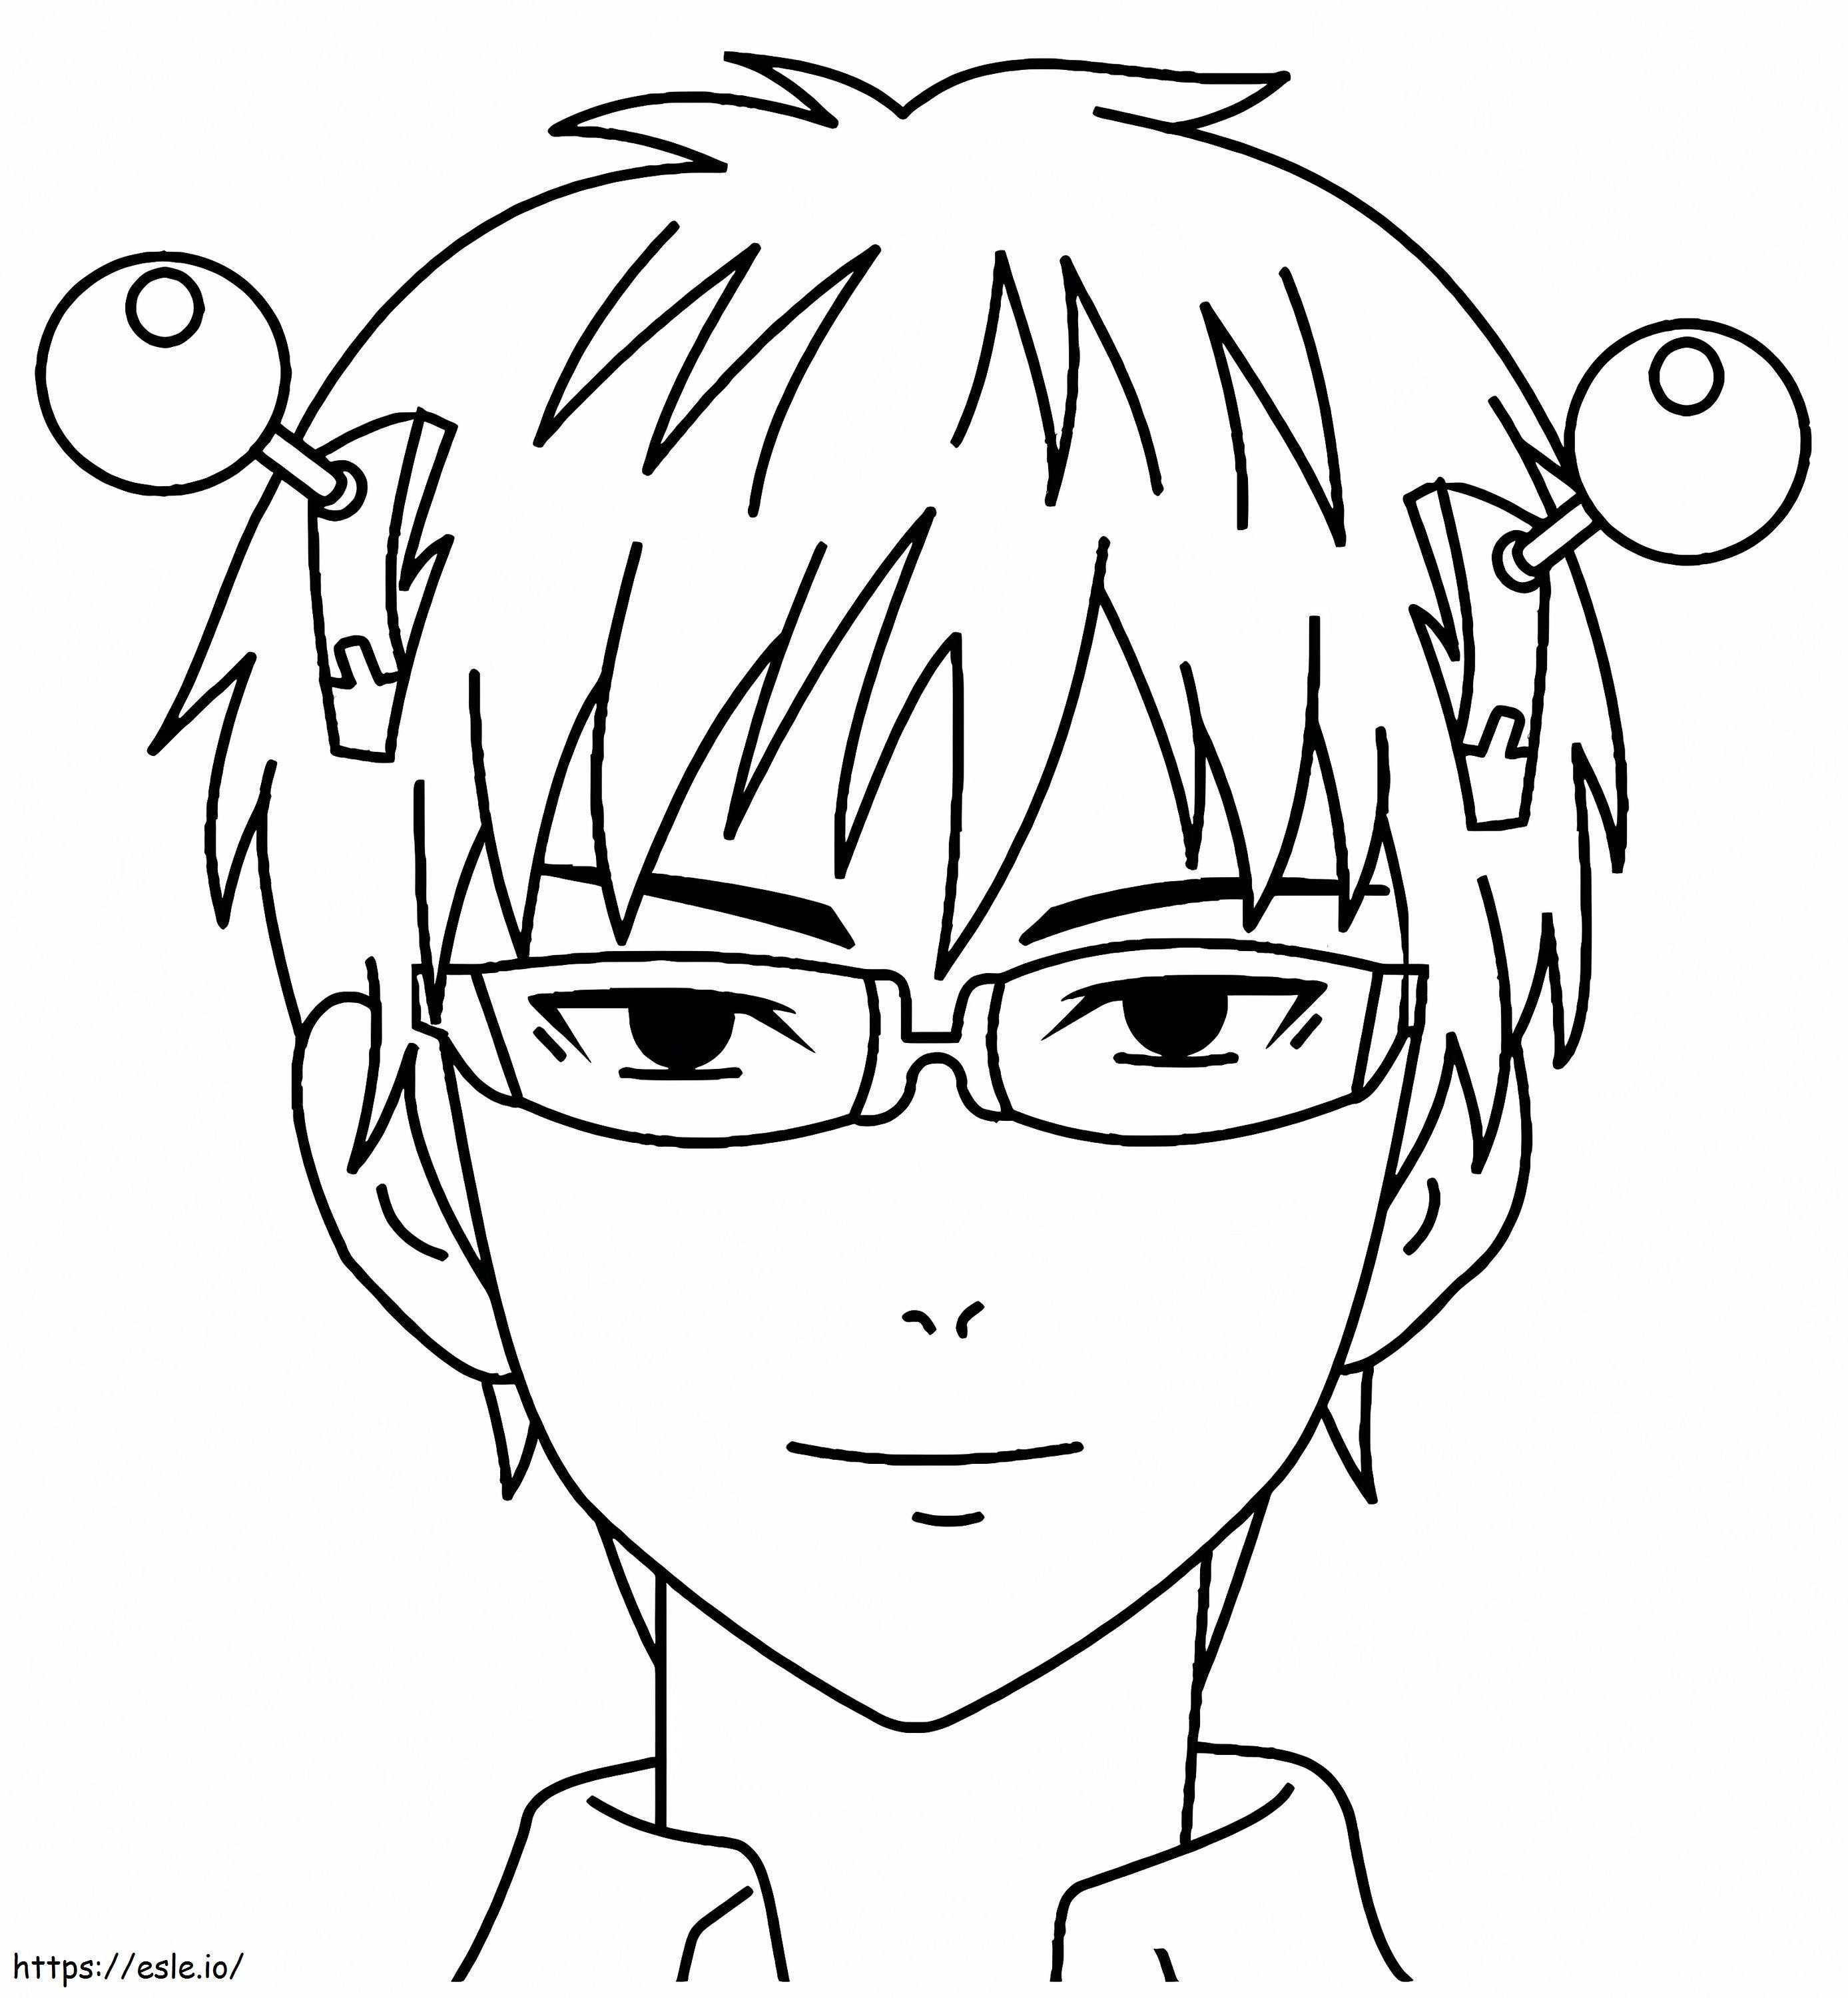 Now K Is Smiling coloring page